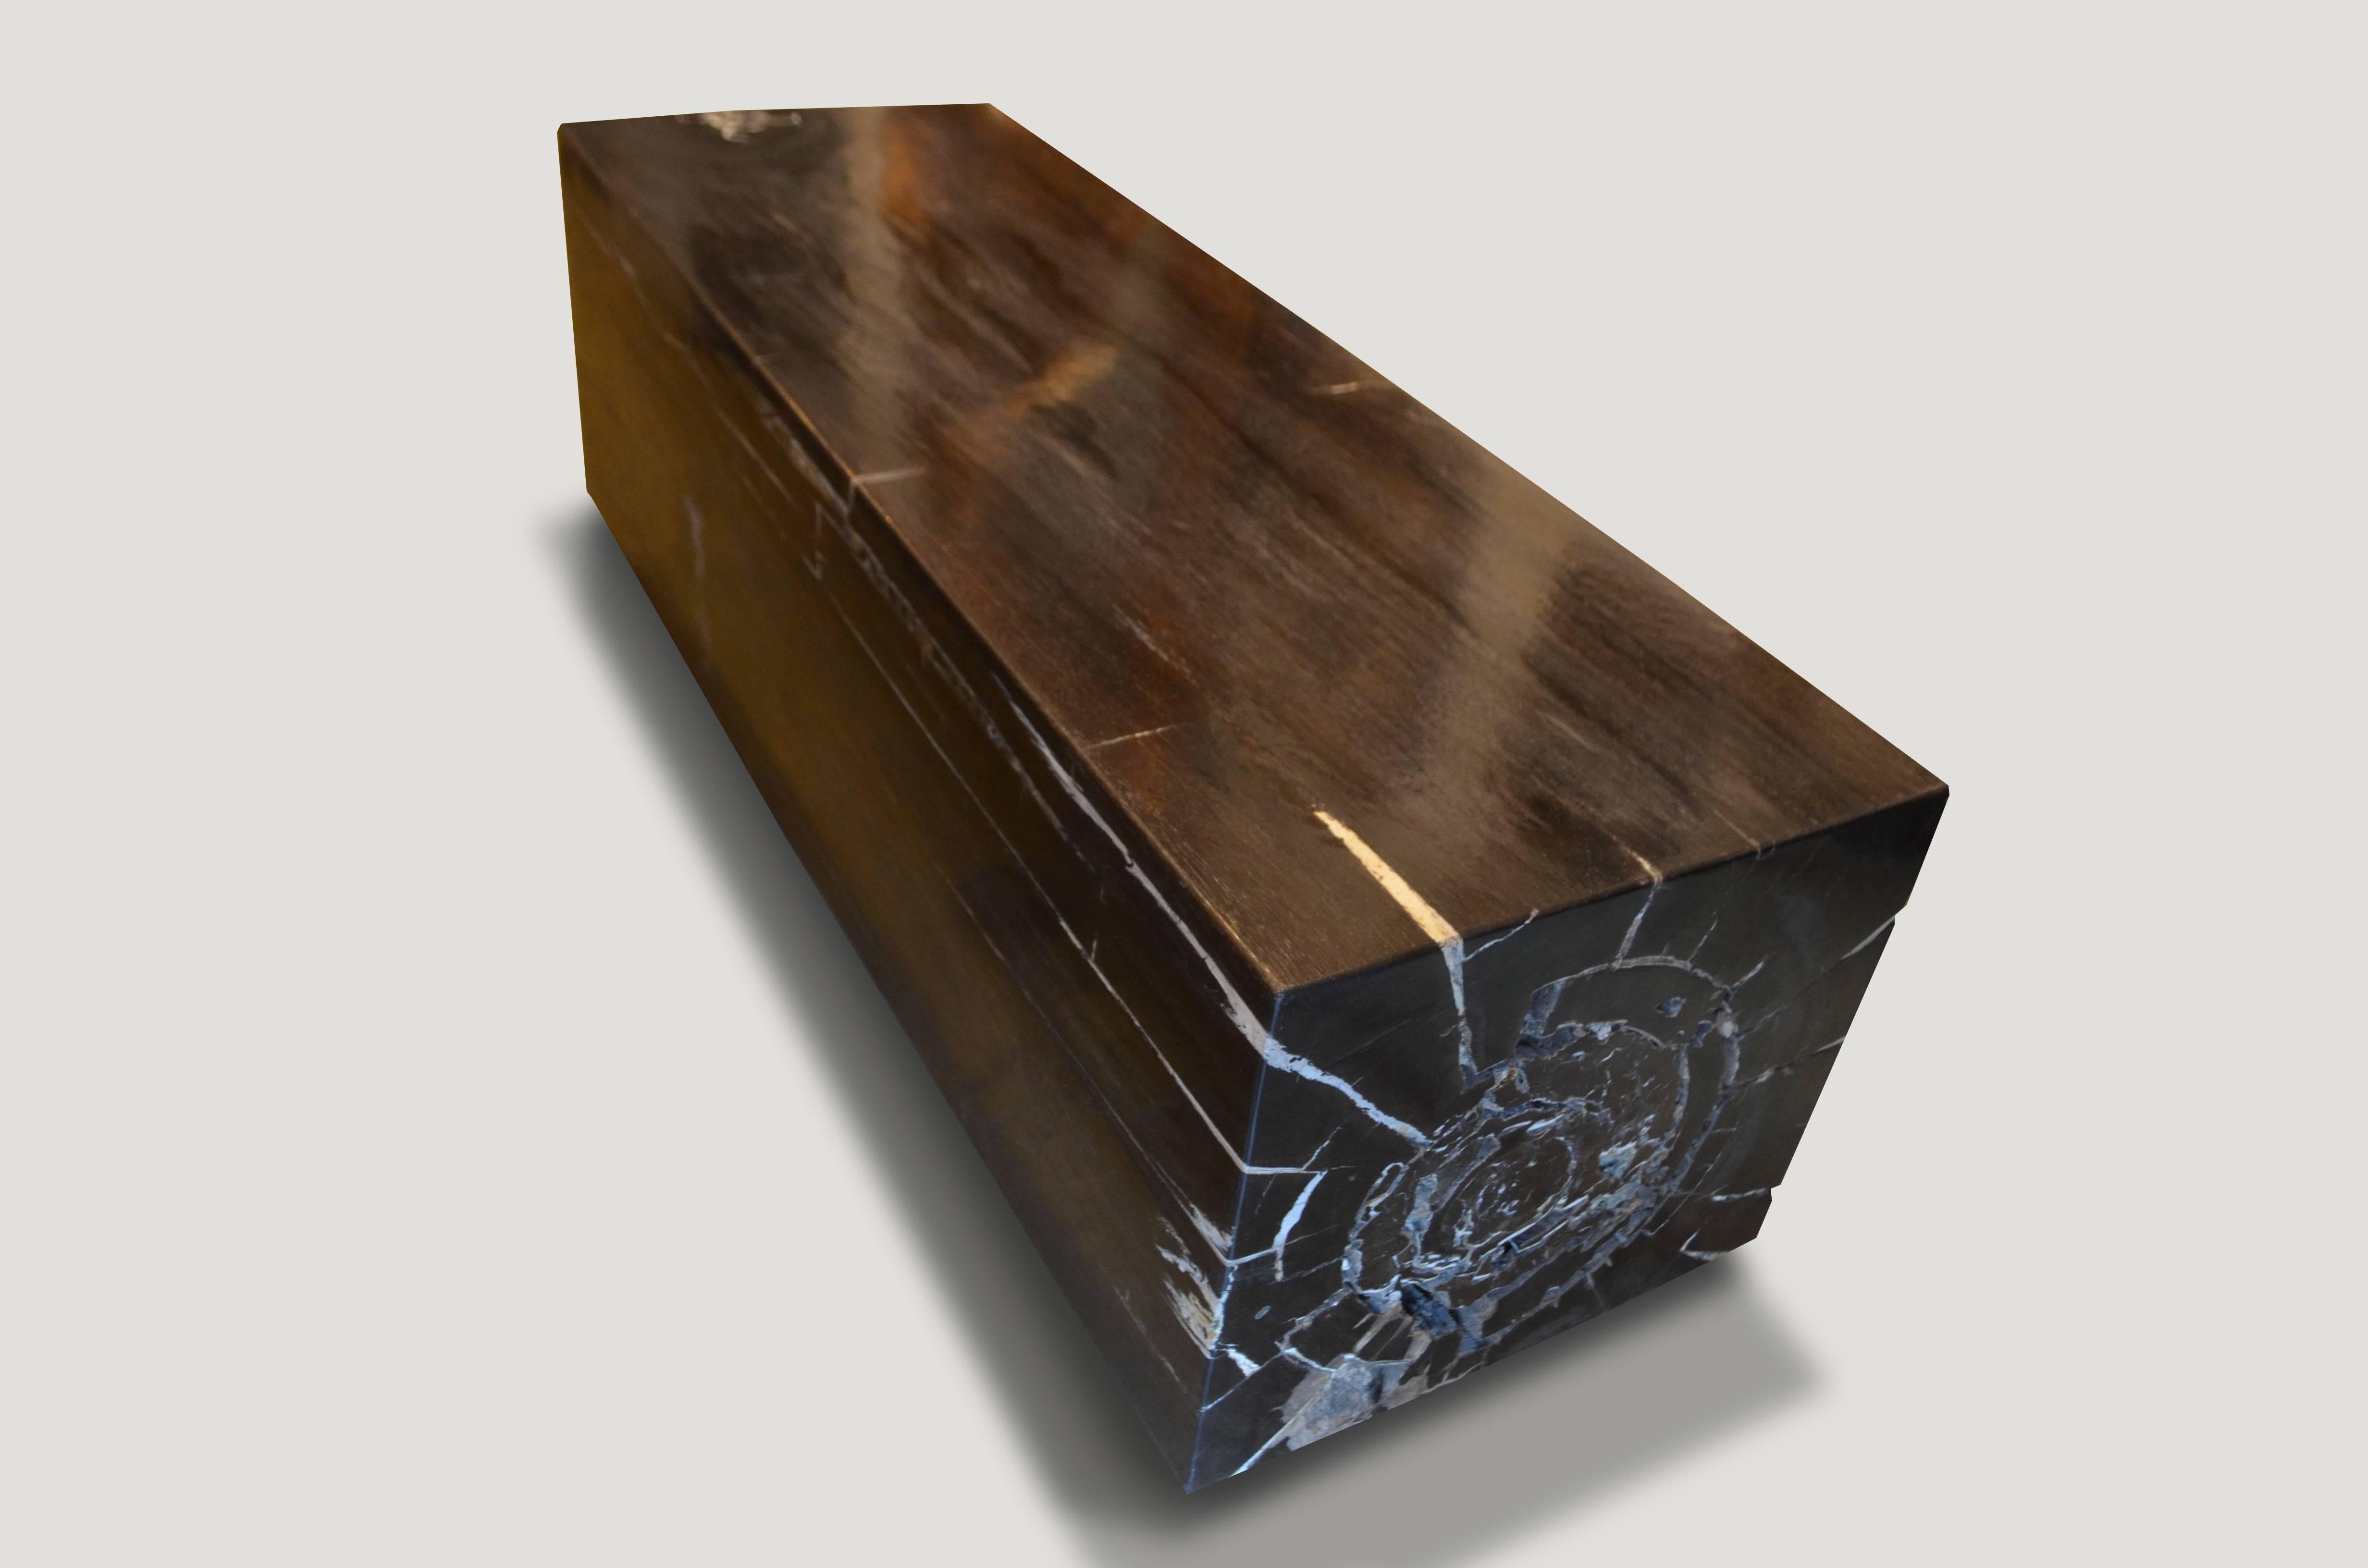 High quality super smooth petrified wood log bench. Stunning charcoal grey, black and white tones make this an impressive piece for any space. Floating on two espresso stained wooden bases which can be modified for a different height. Each side is